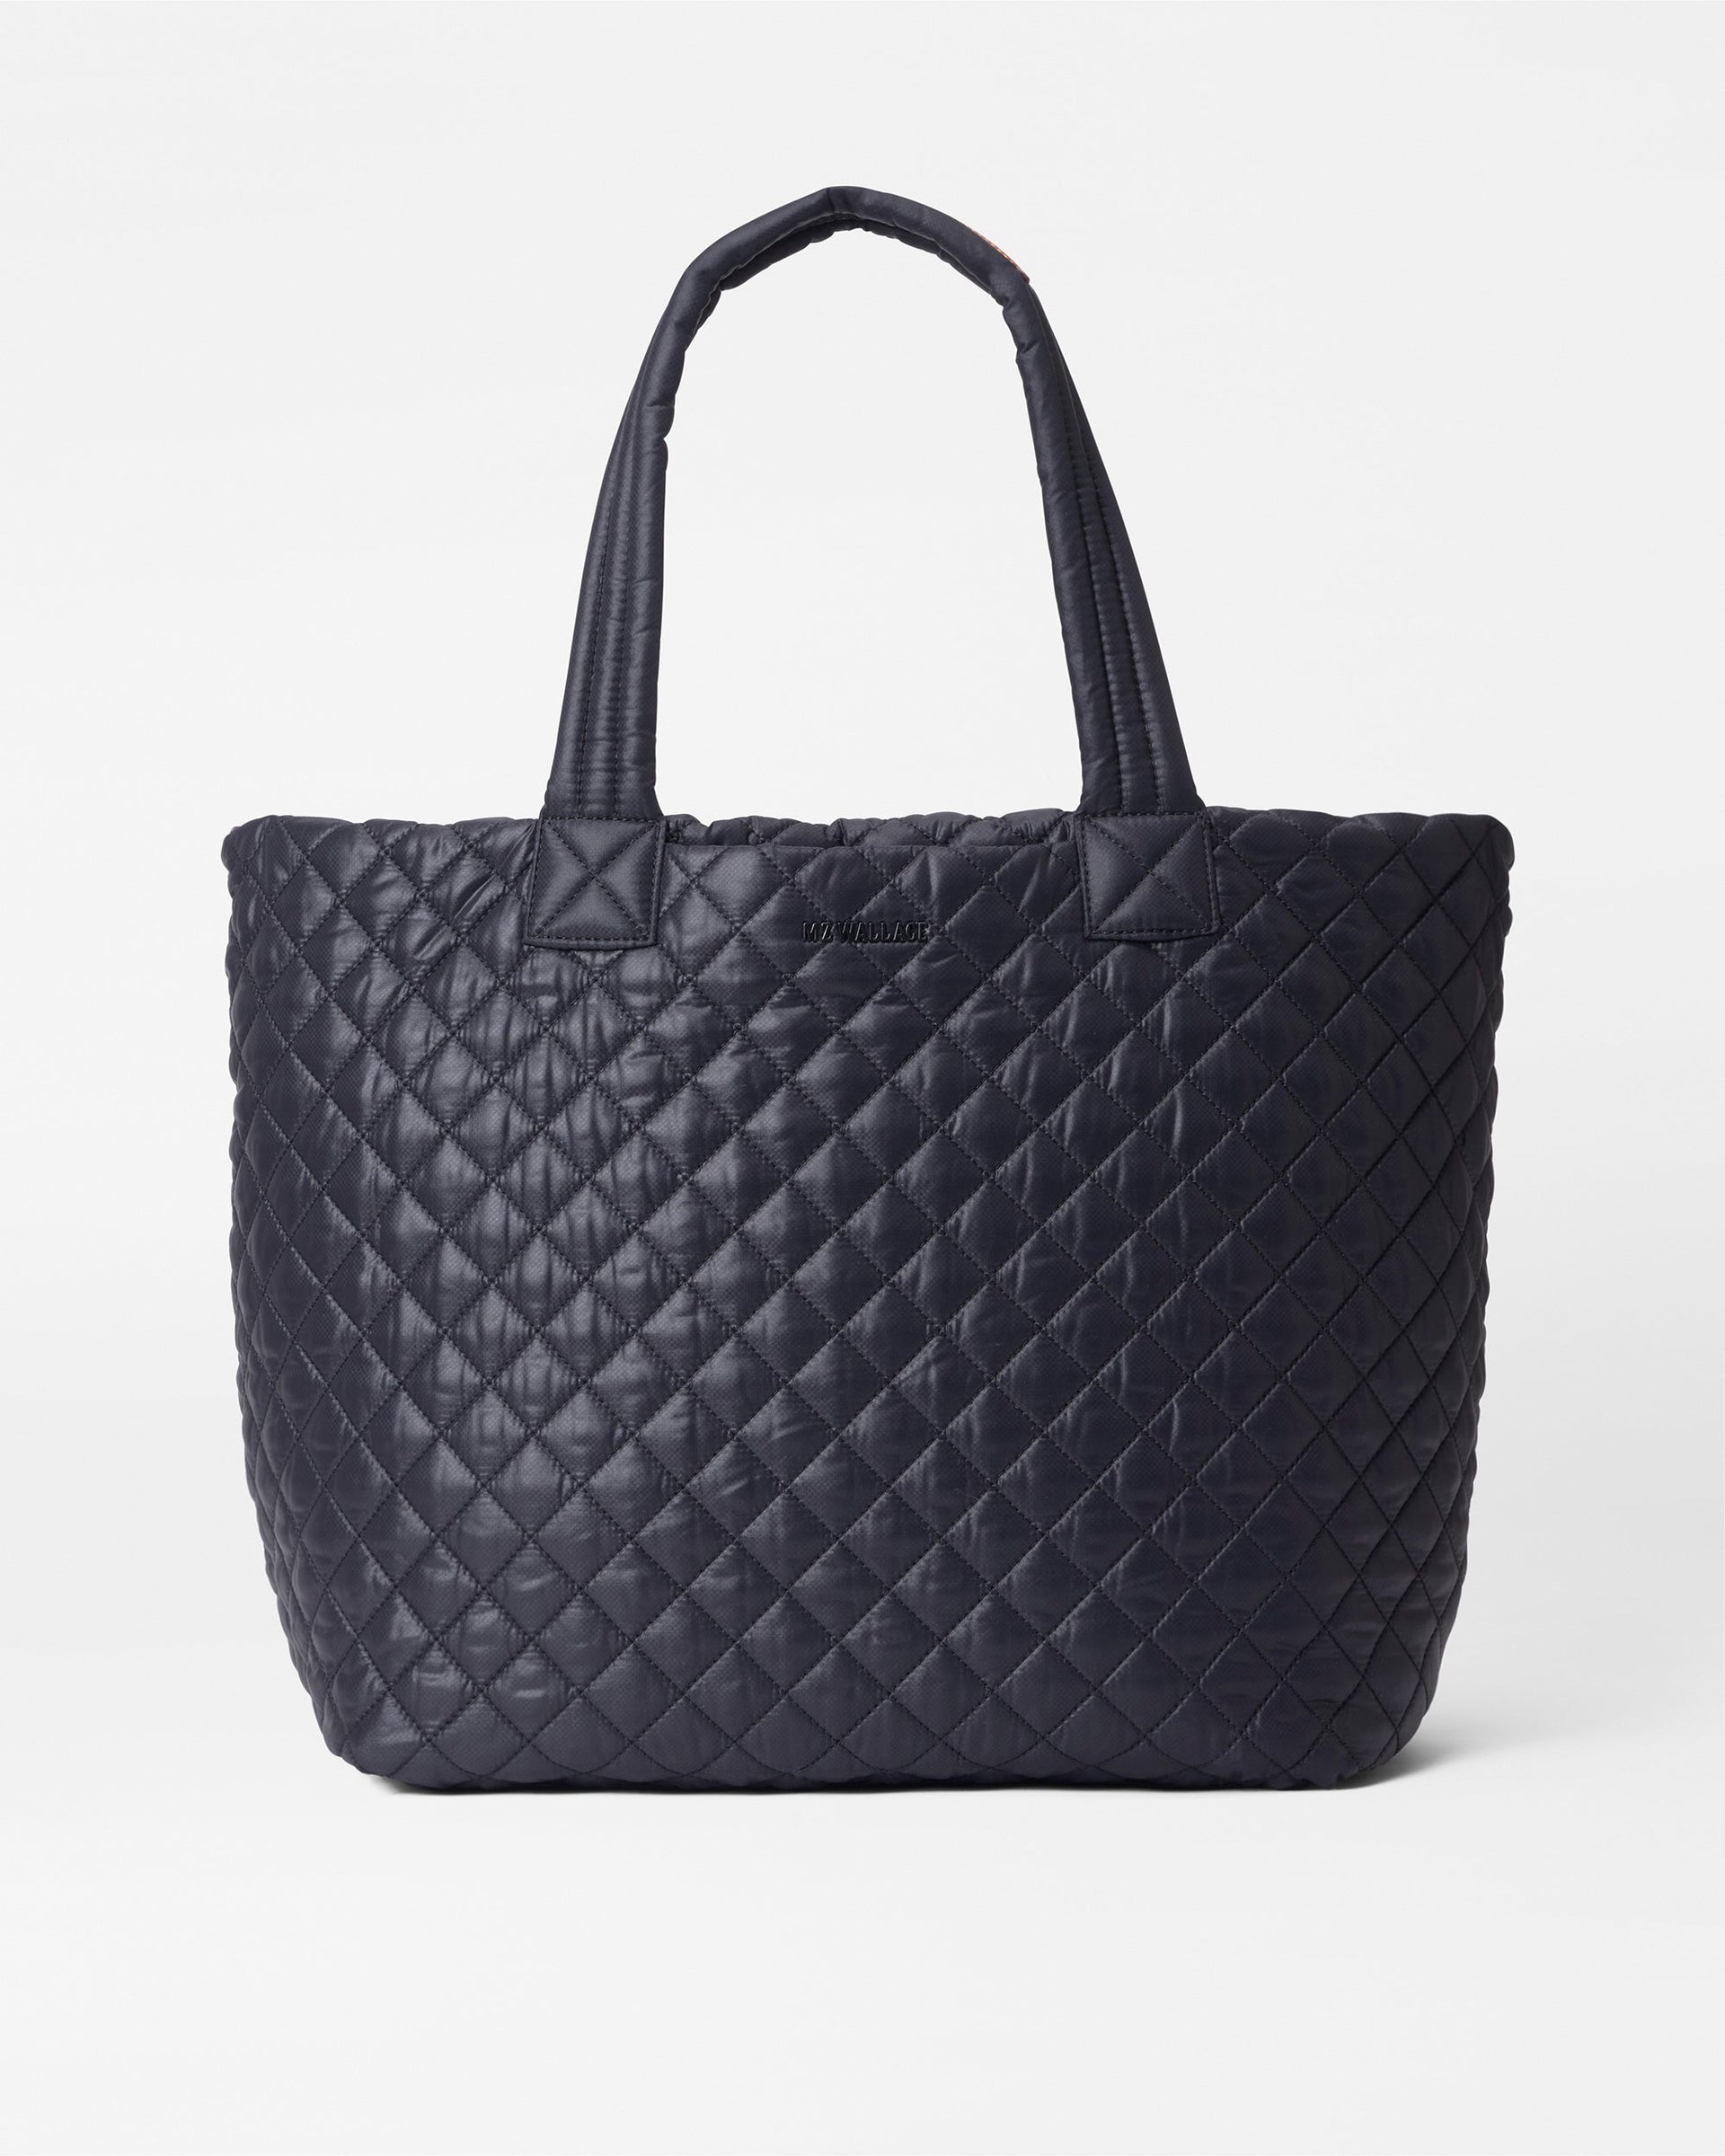 MZ WALLACE Large Metro Tote Deluxe!, What's in my carry-on travel bag?